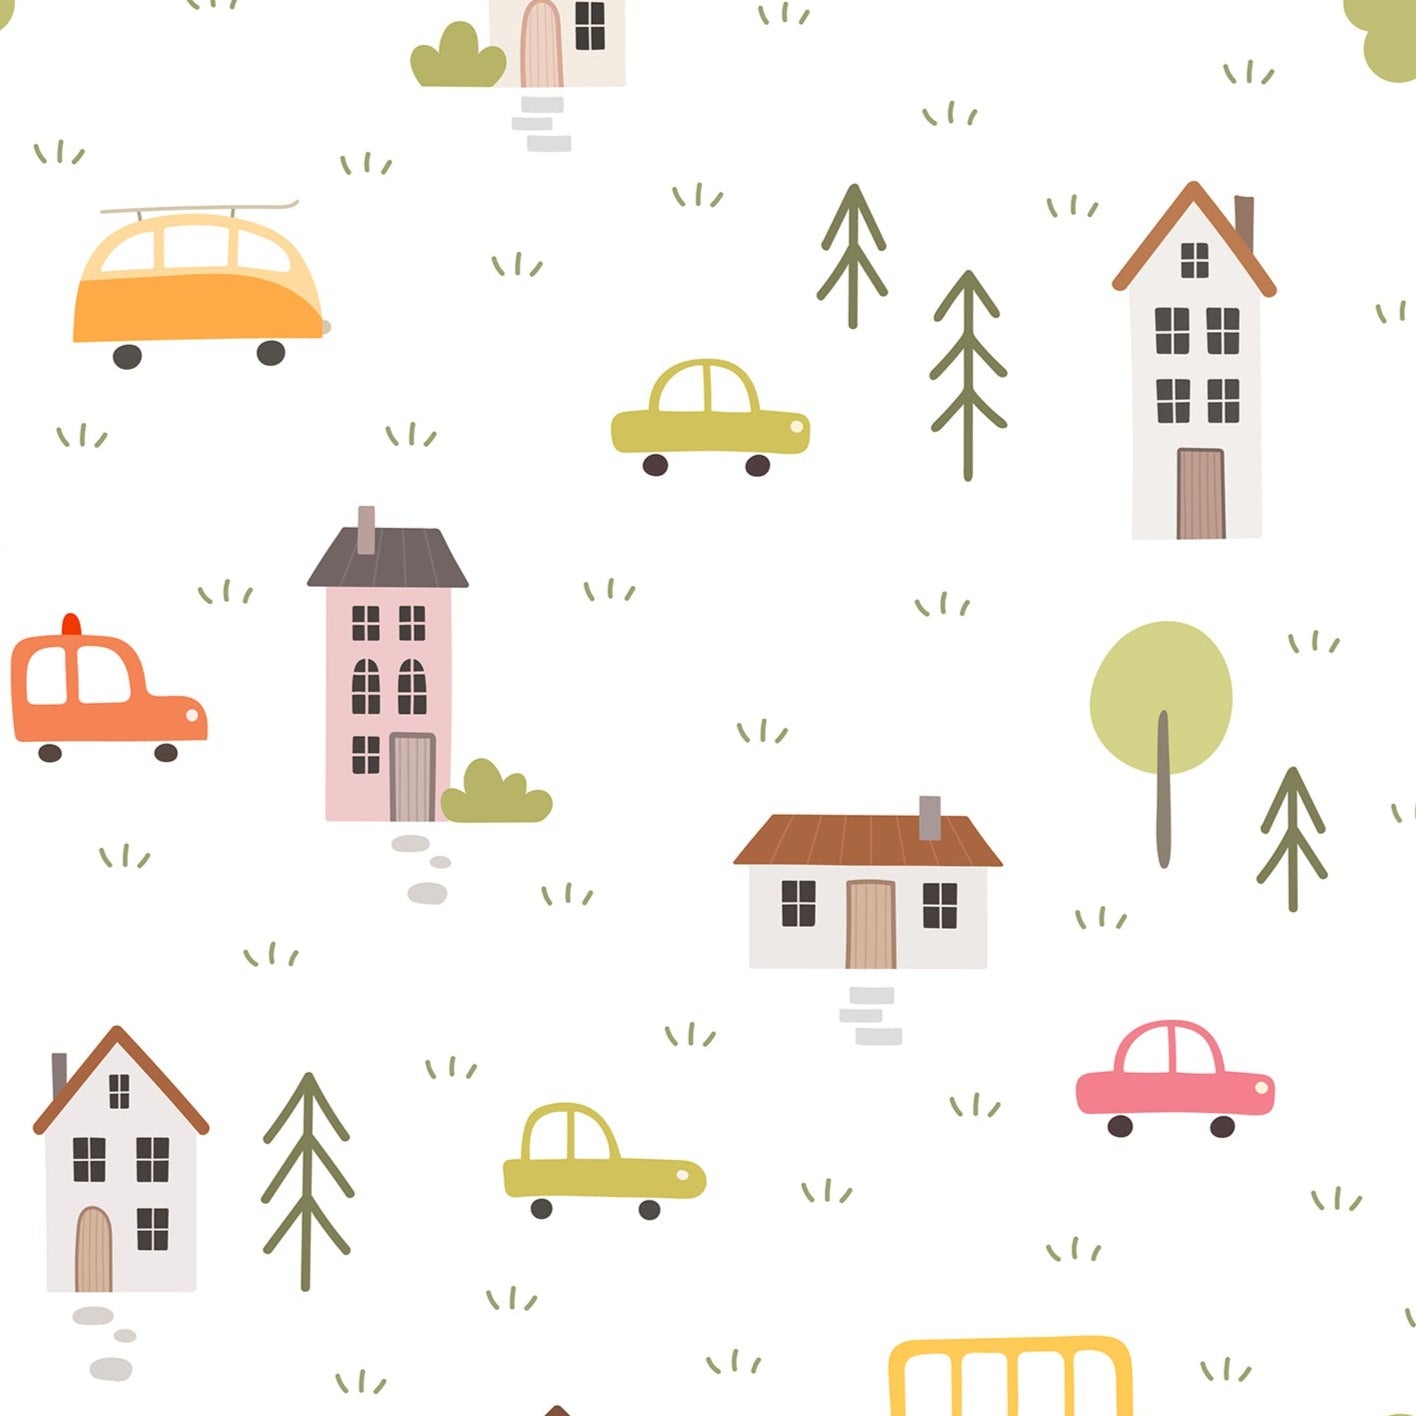 School Bus Wallpaper featuring a playful pattern of colorful cars, buses, houses, and trees on a white background, creating a cheerful and whimsical scene